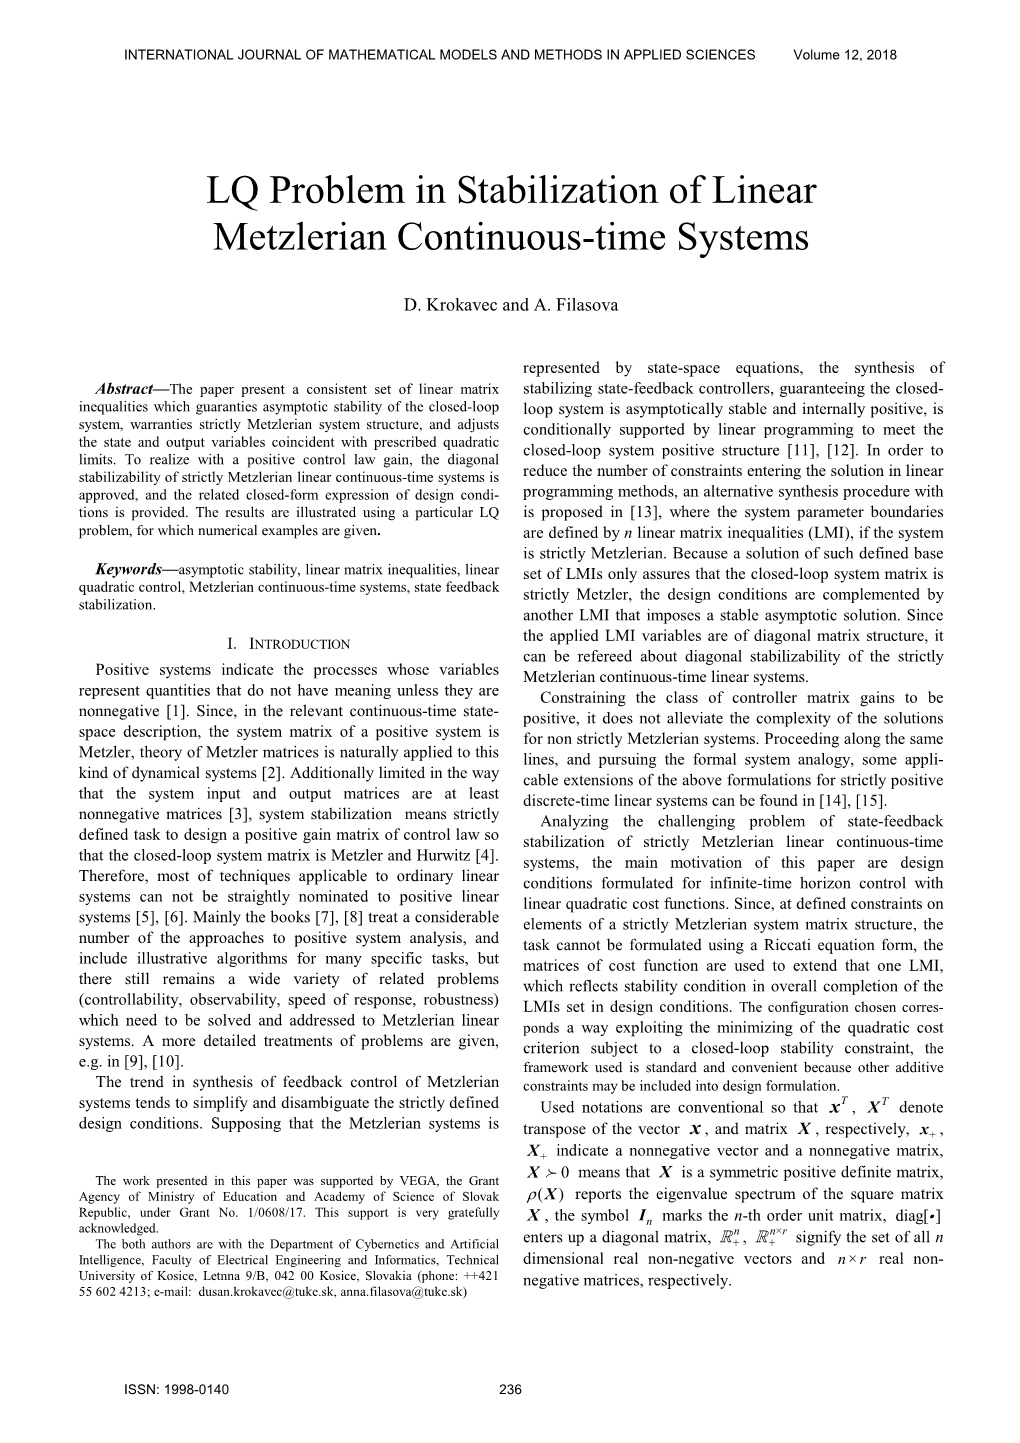 LQ Problem in Stabilization of Linear Metzlerian Continuous-Time Systems